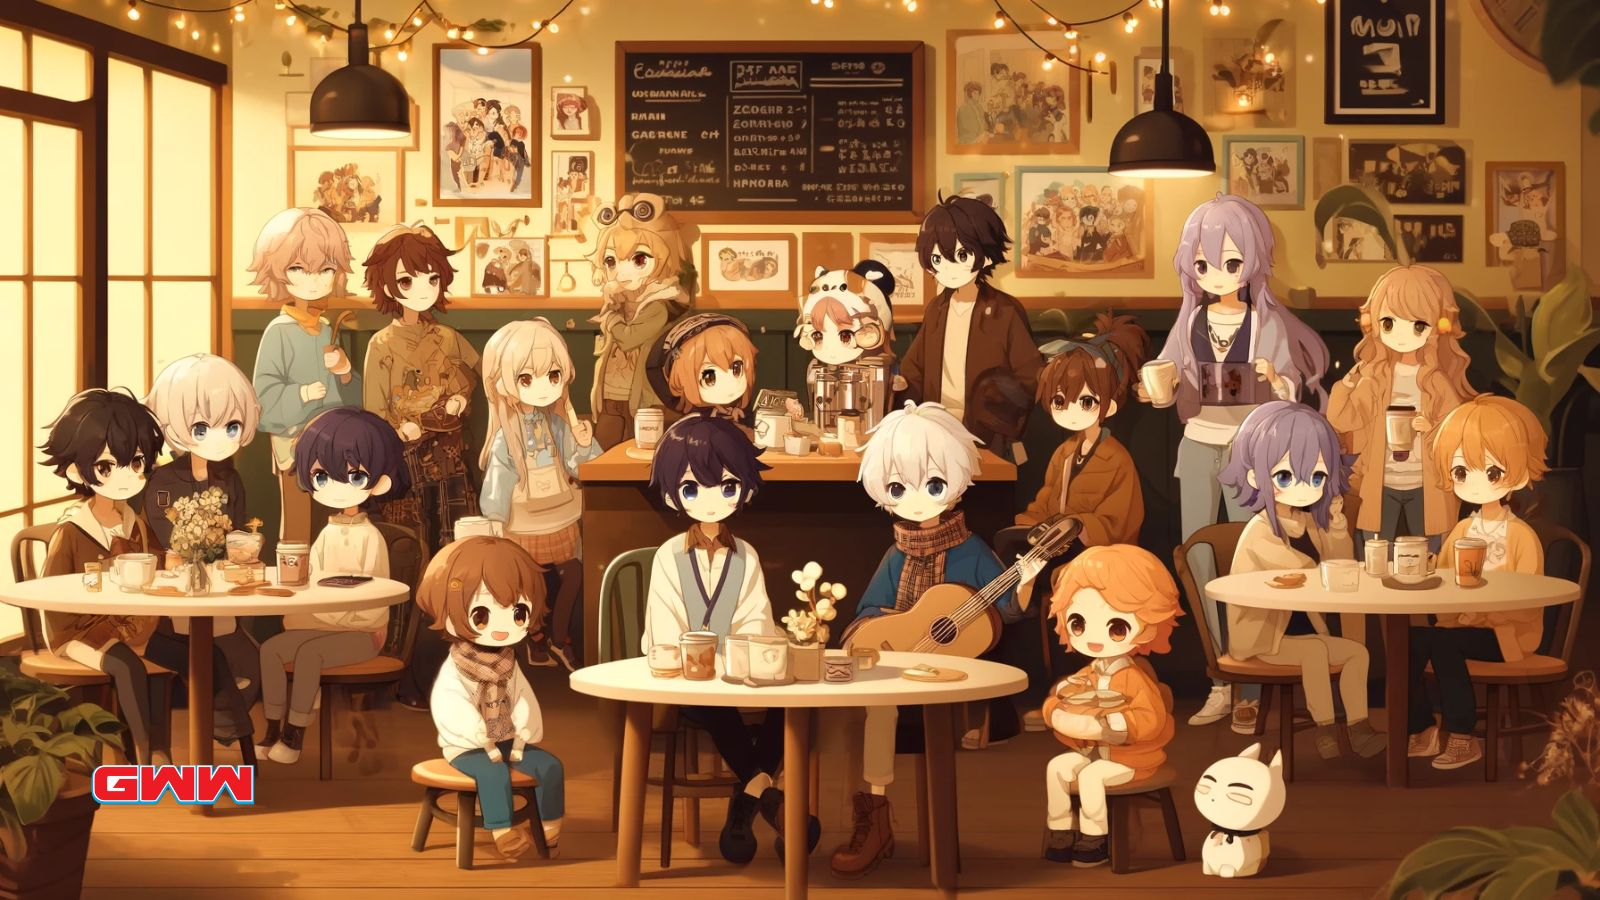 Kawaii anime characters in a cozy café environment